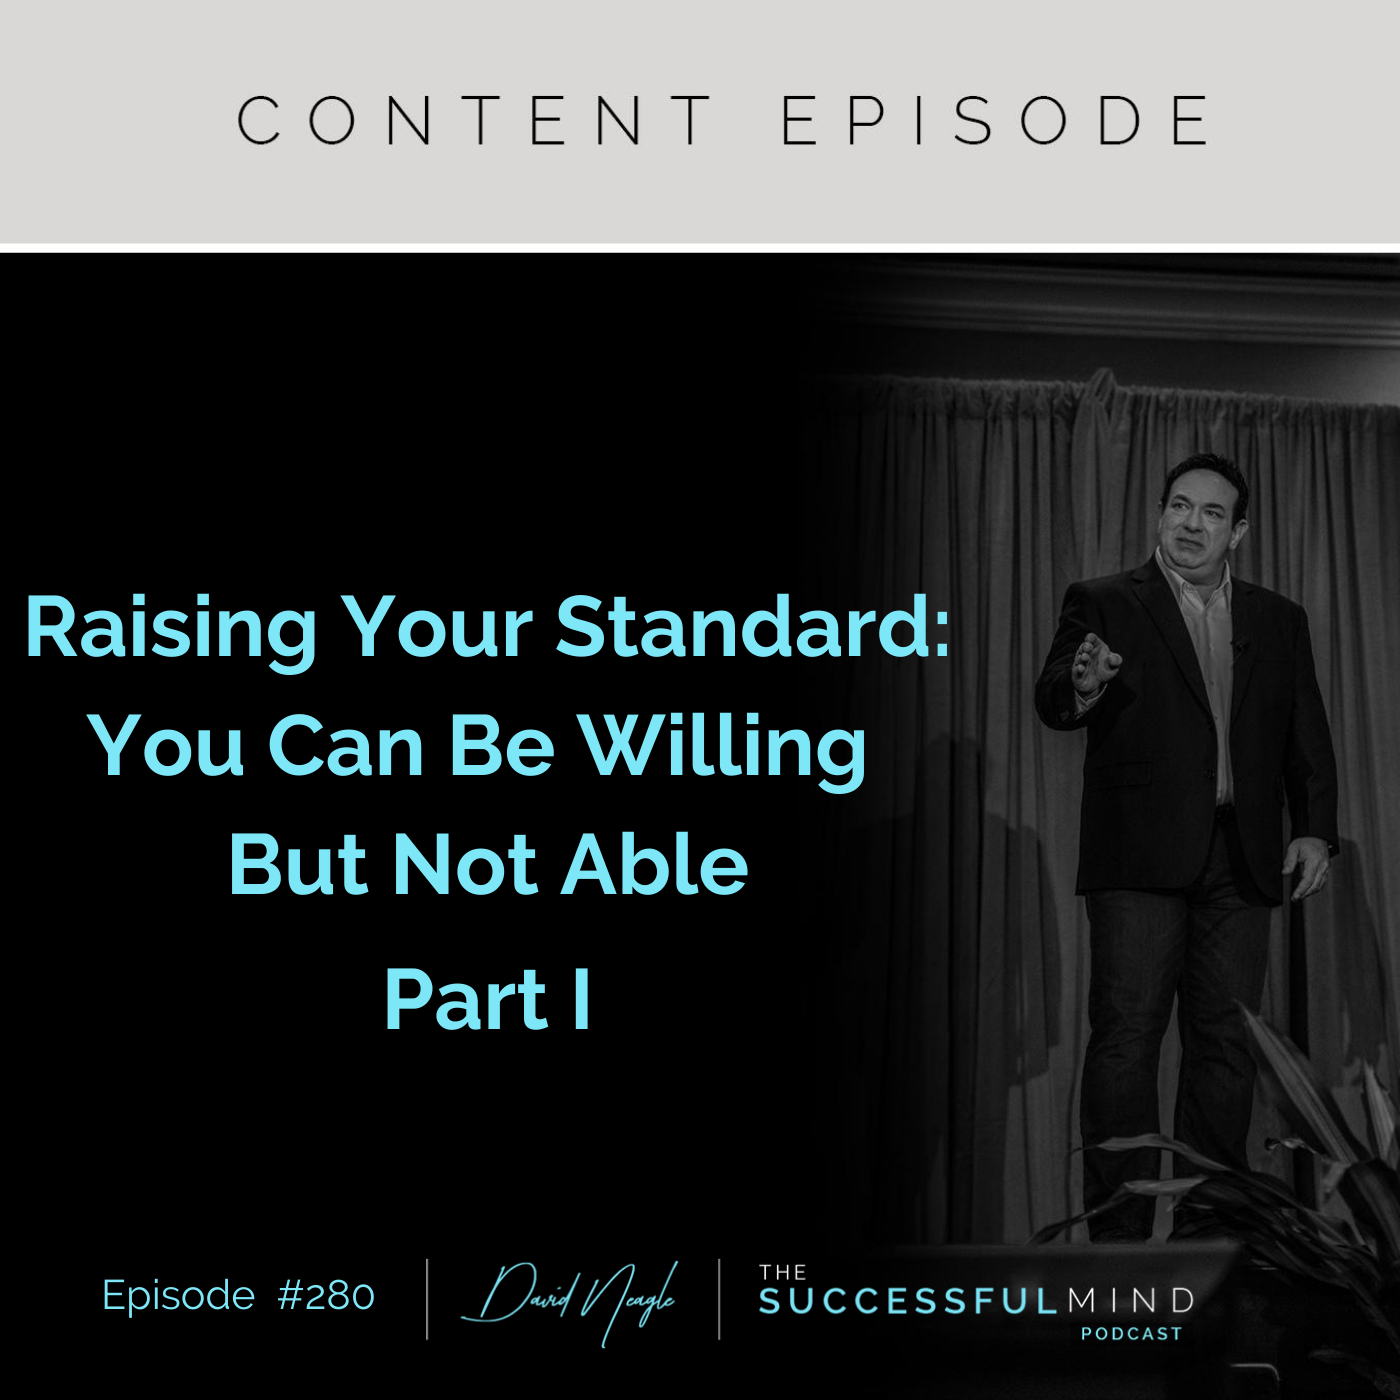 Successful Mind Podcast- Episode 280. Discipline and the importance of raising your standard